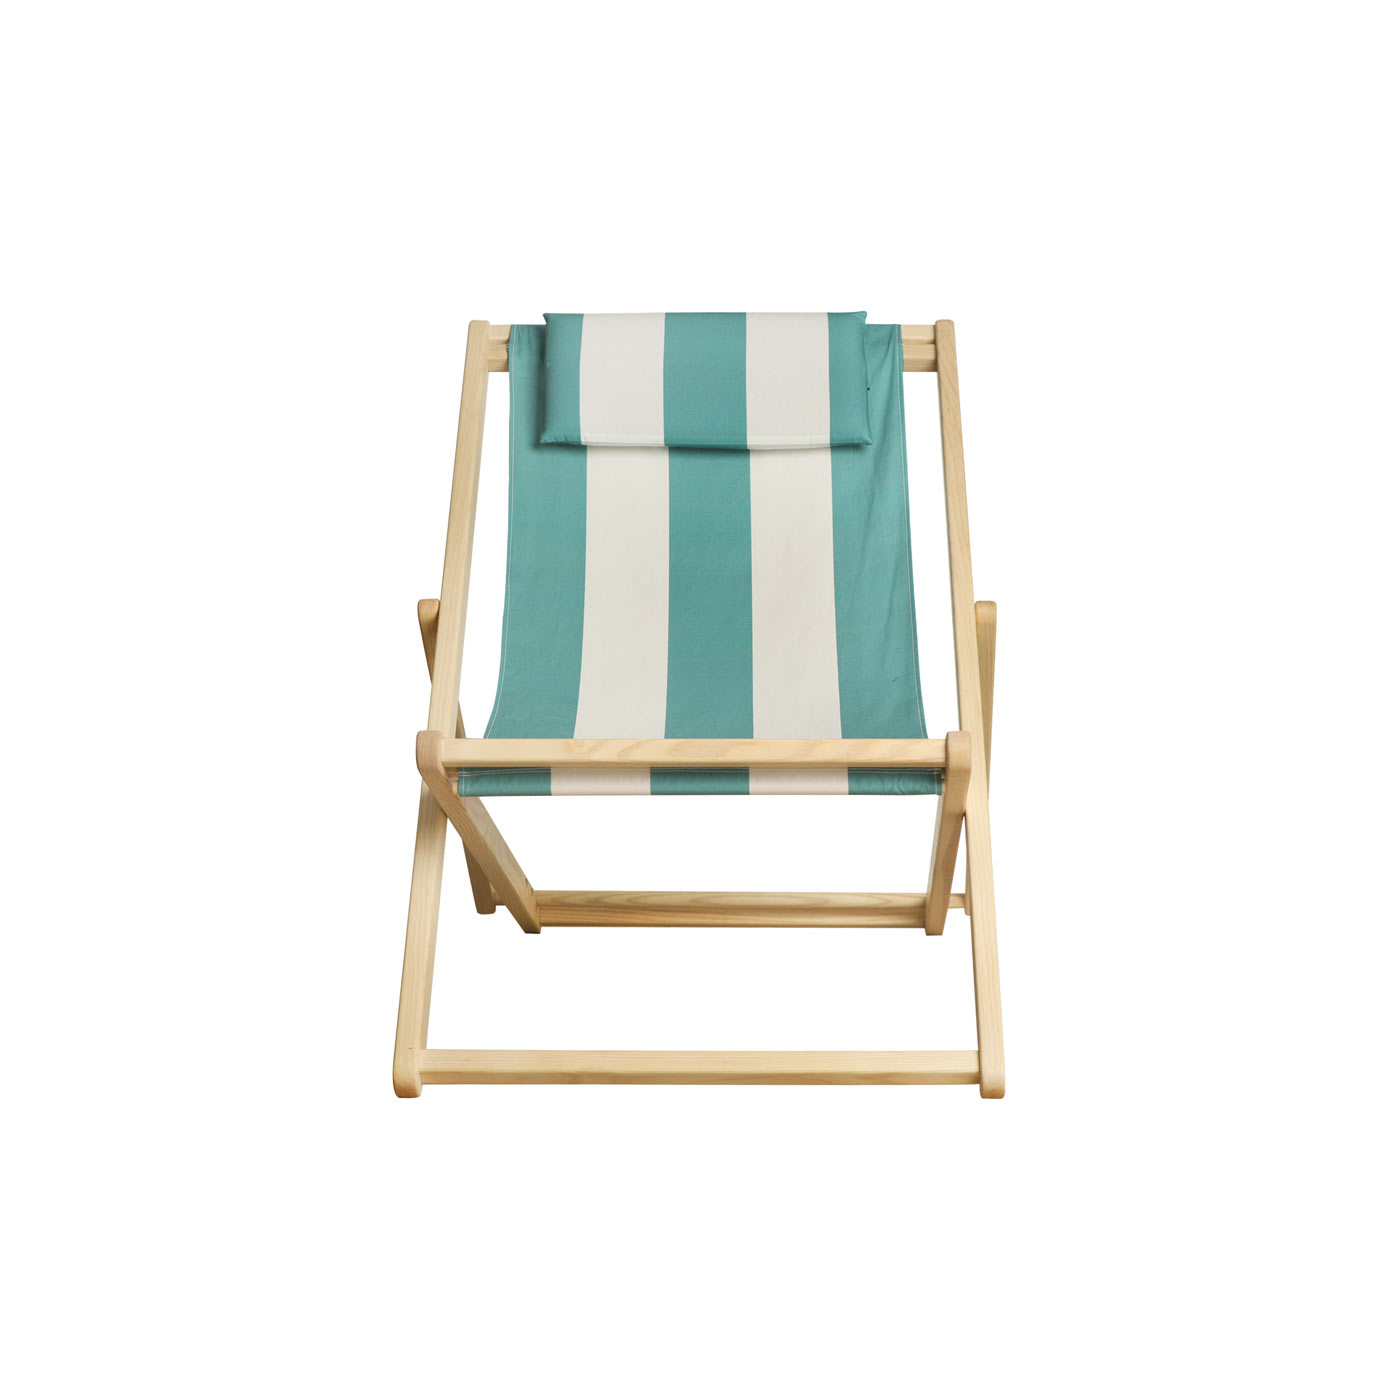 Palermo Turquoise & White Striped Light Lounge Chair